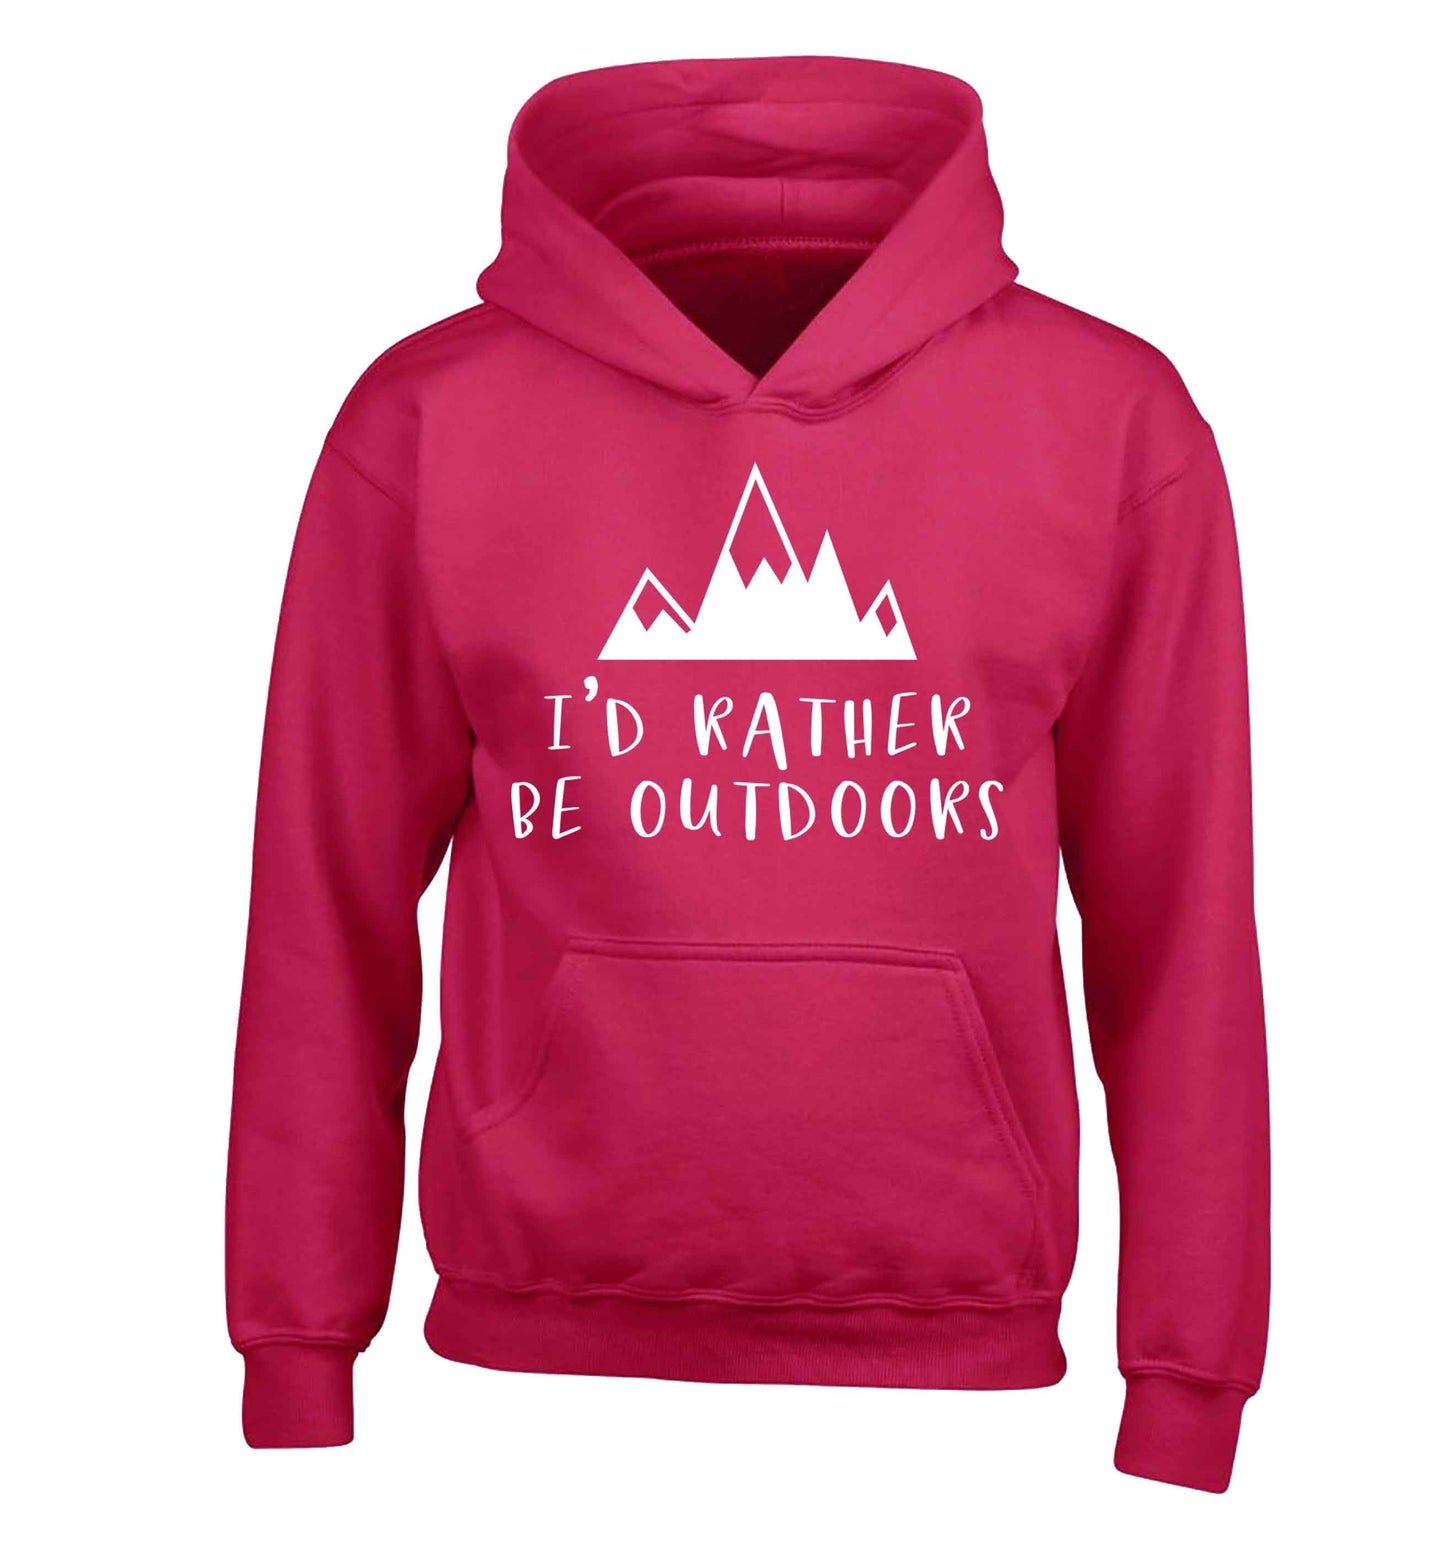 I'd rather be outdoors children's pink hoodie 12-13 Years